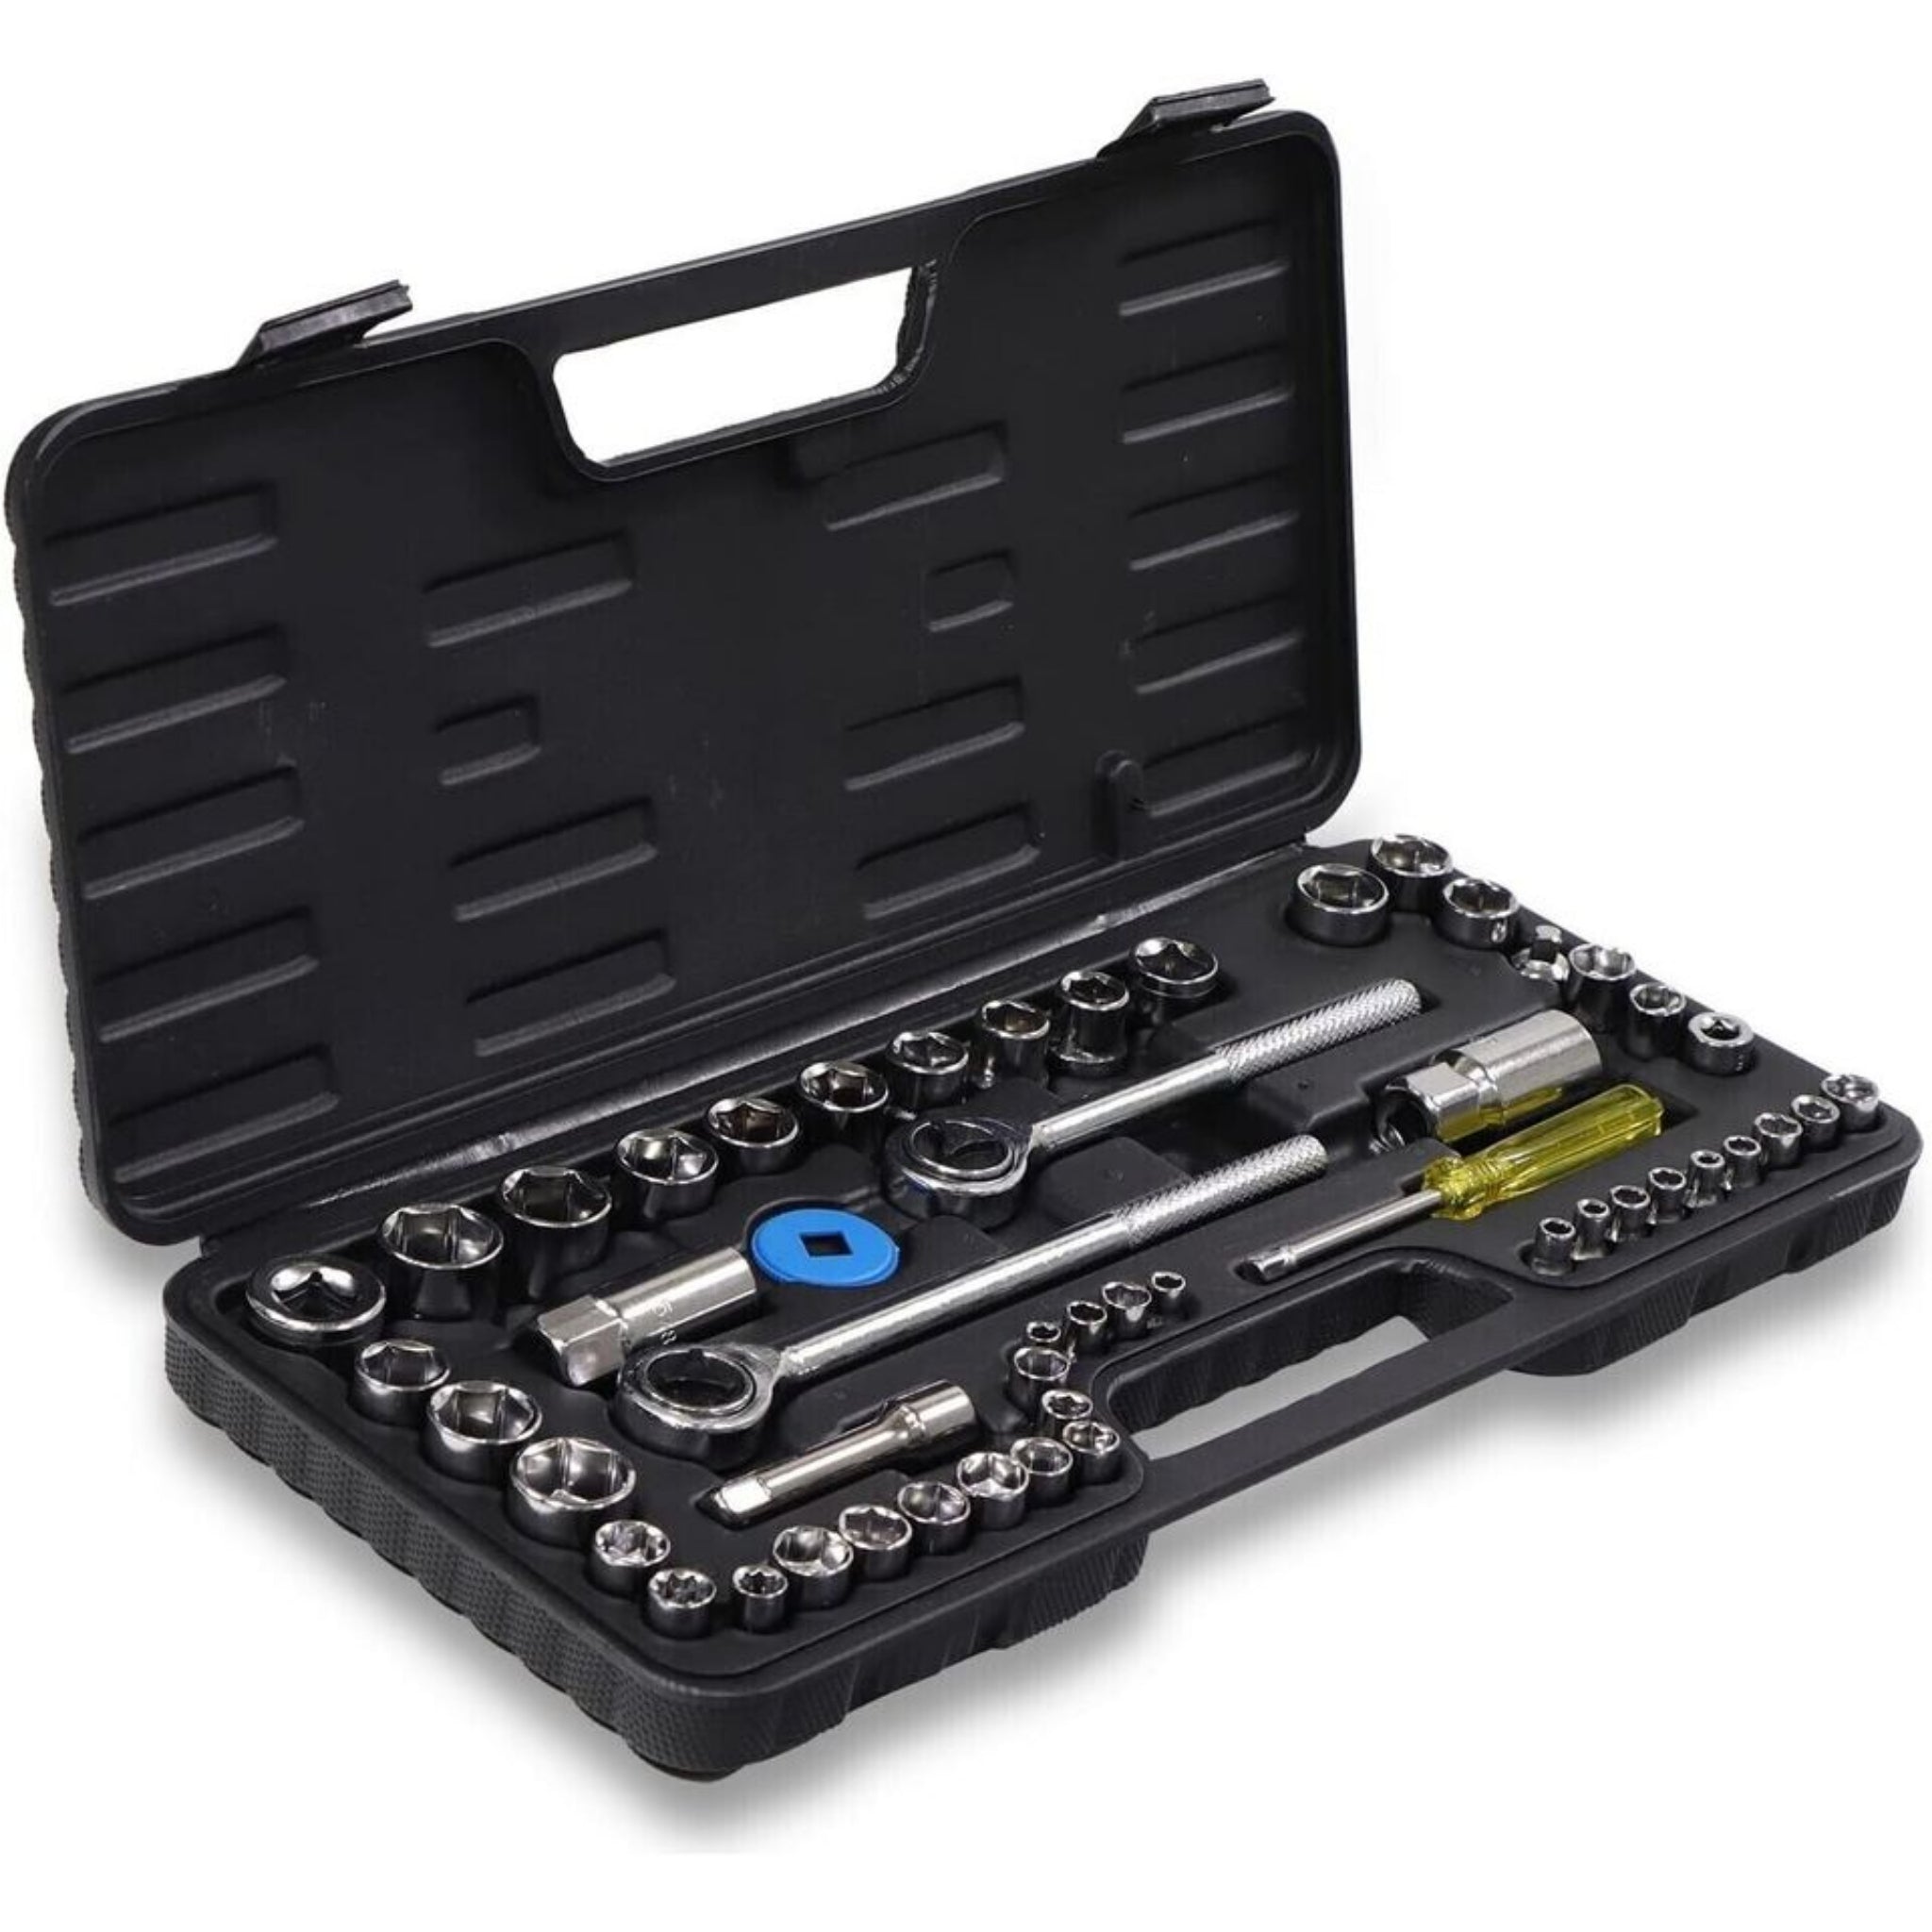 Beclen Harp 52pc 1/4" & 3/8" socket driver set metric imperial ratchet bolts spark with case